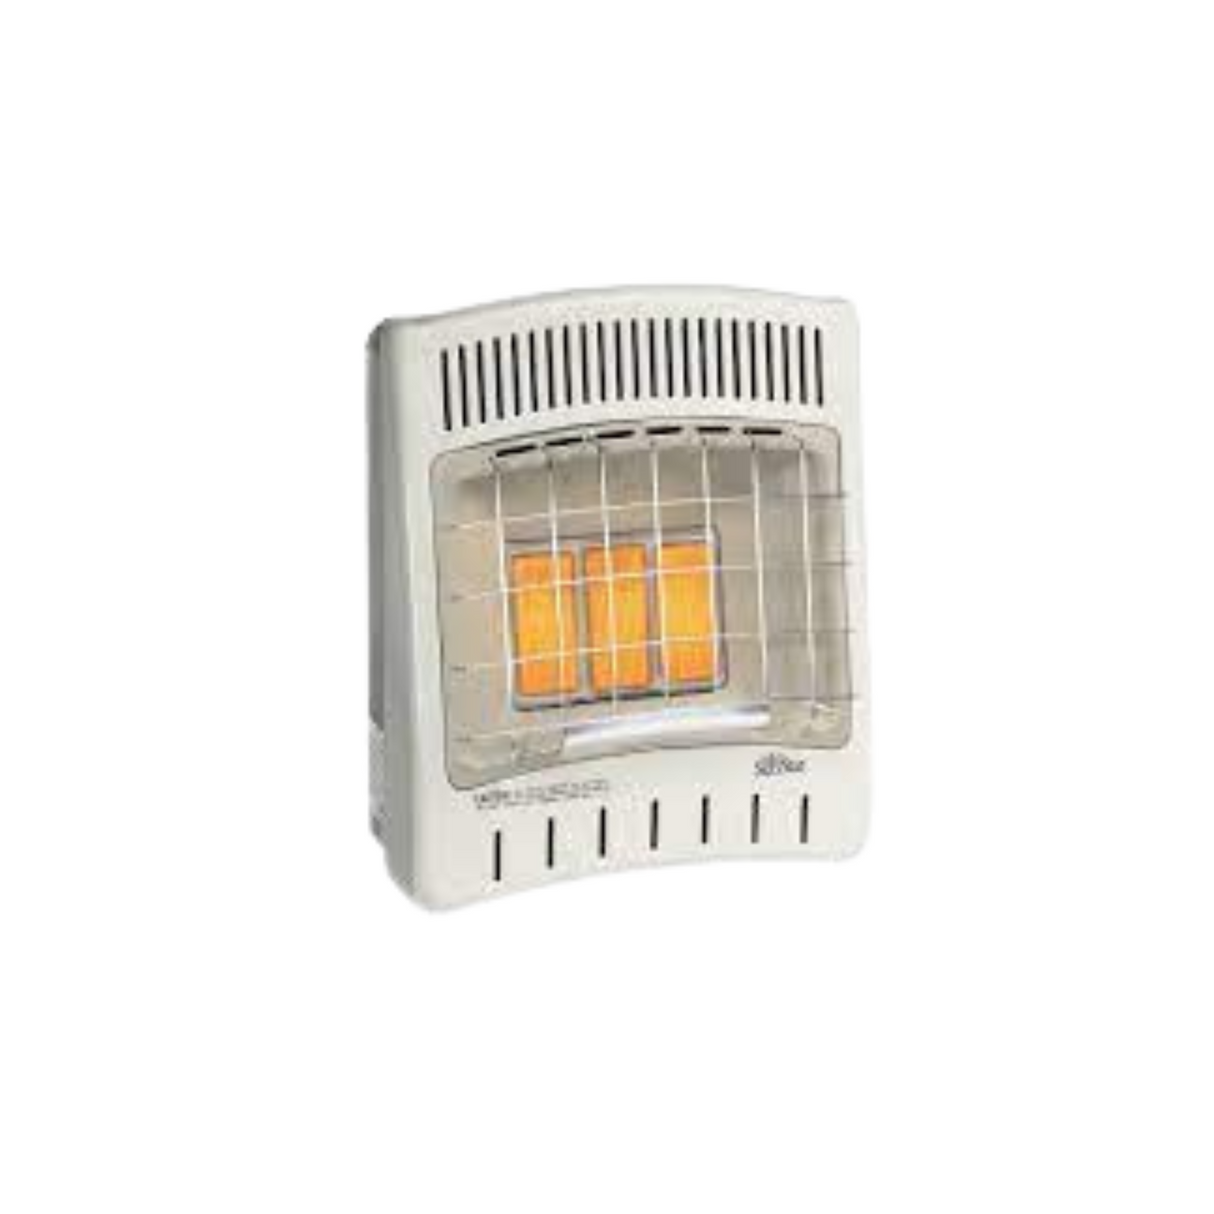 Sunstar Heating Products SC18T-N 18000 BTU Thermostatic Vent Free Infrared/Radiant Heater, Natural Gas